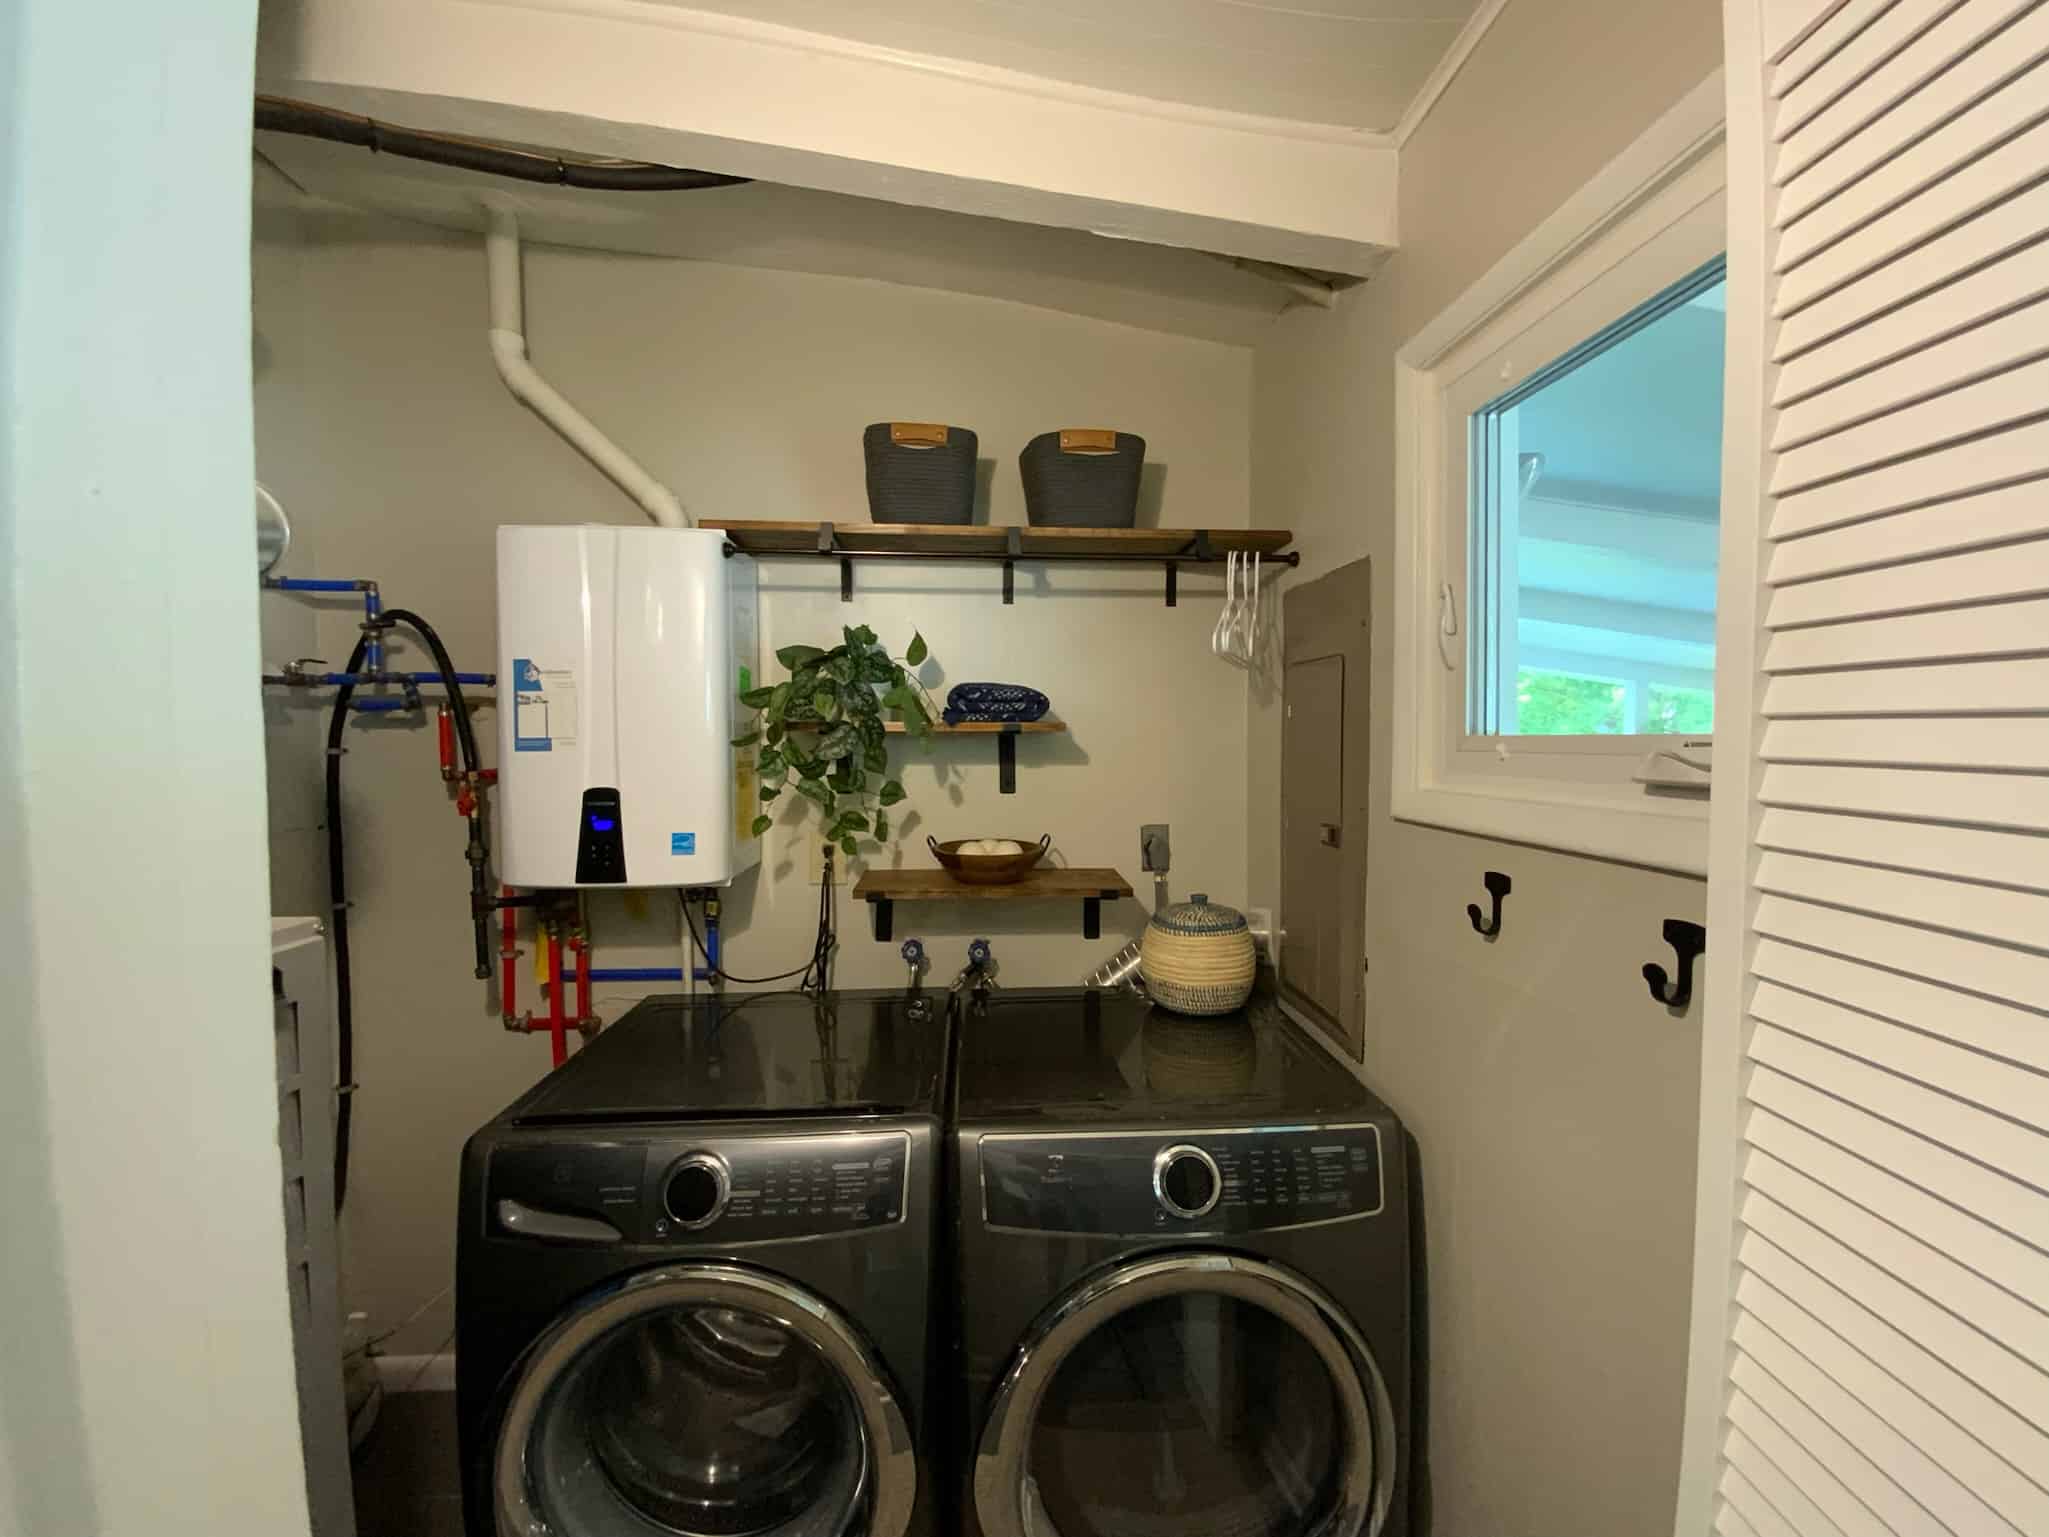 Laundry Room with front load washer and dryer, shelves and hooks